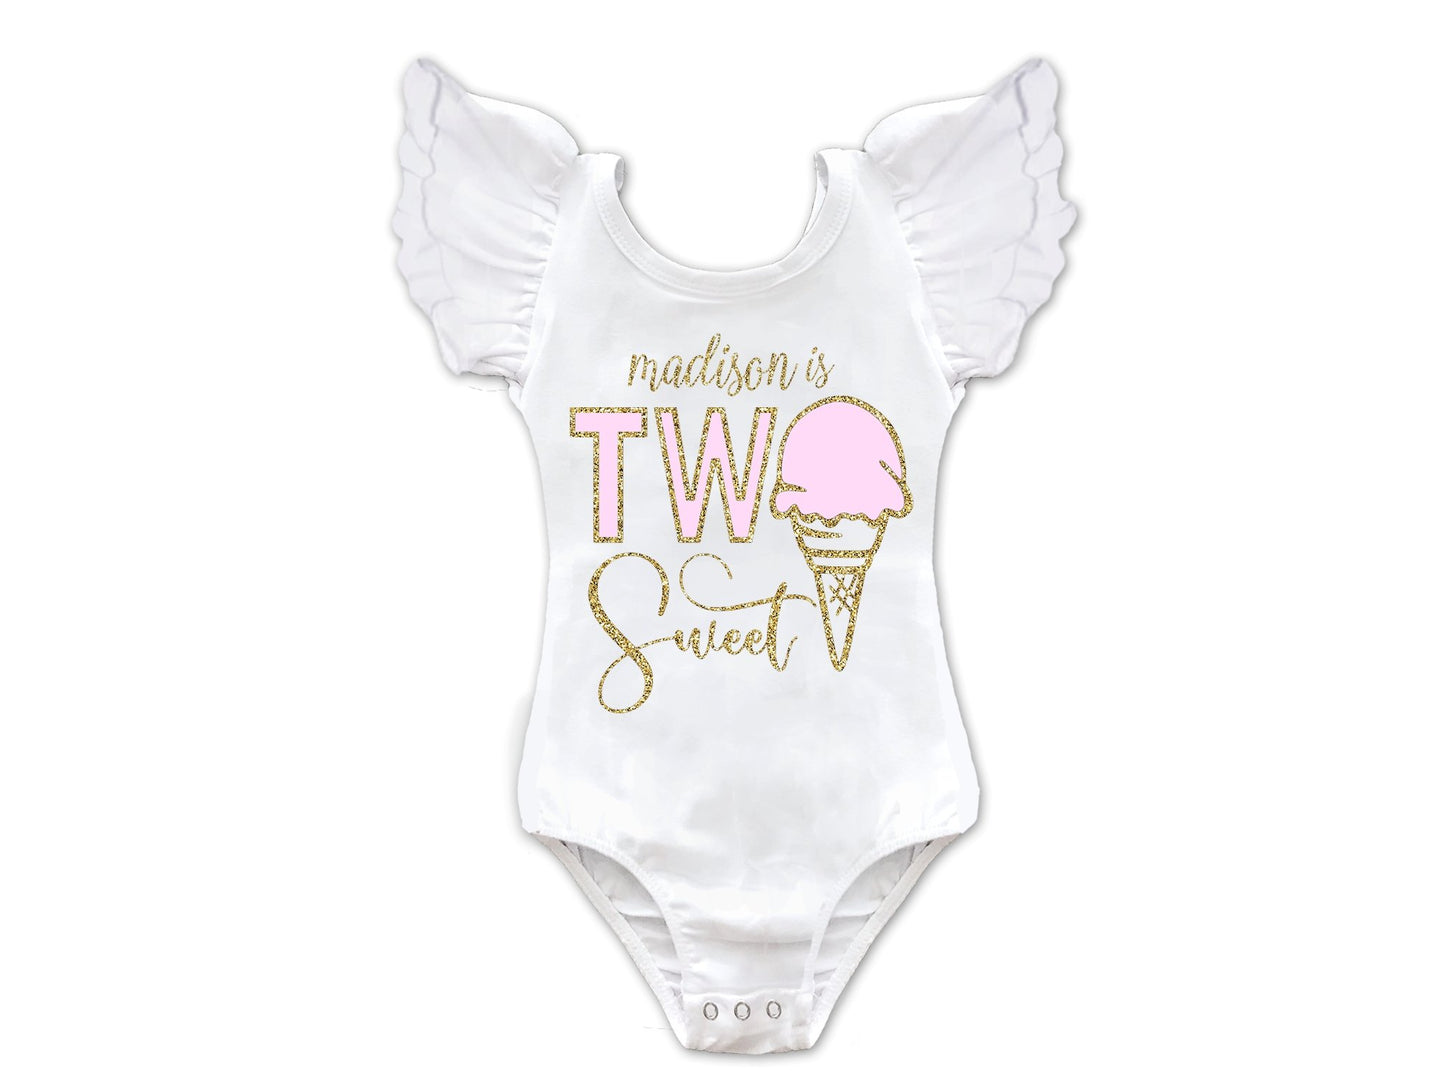 Girl's Personalized Two Sweet Ice Cream Top - Squishy Cheeks